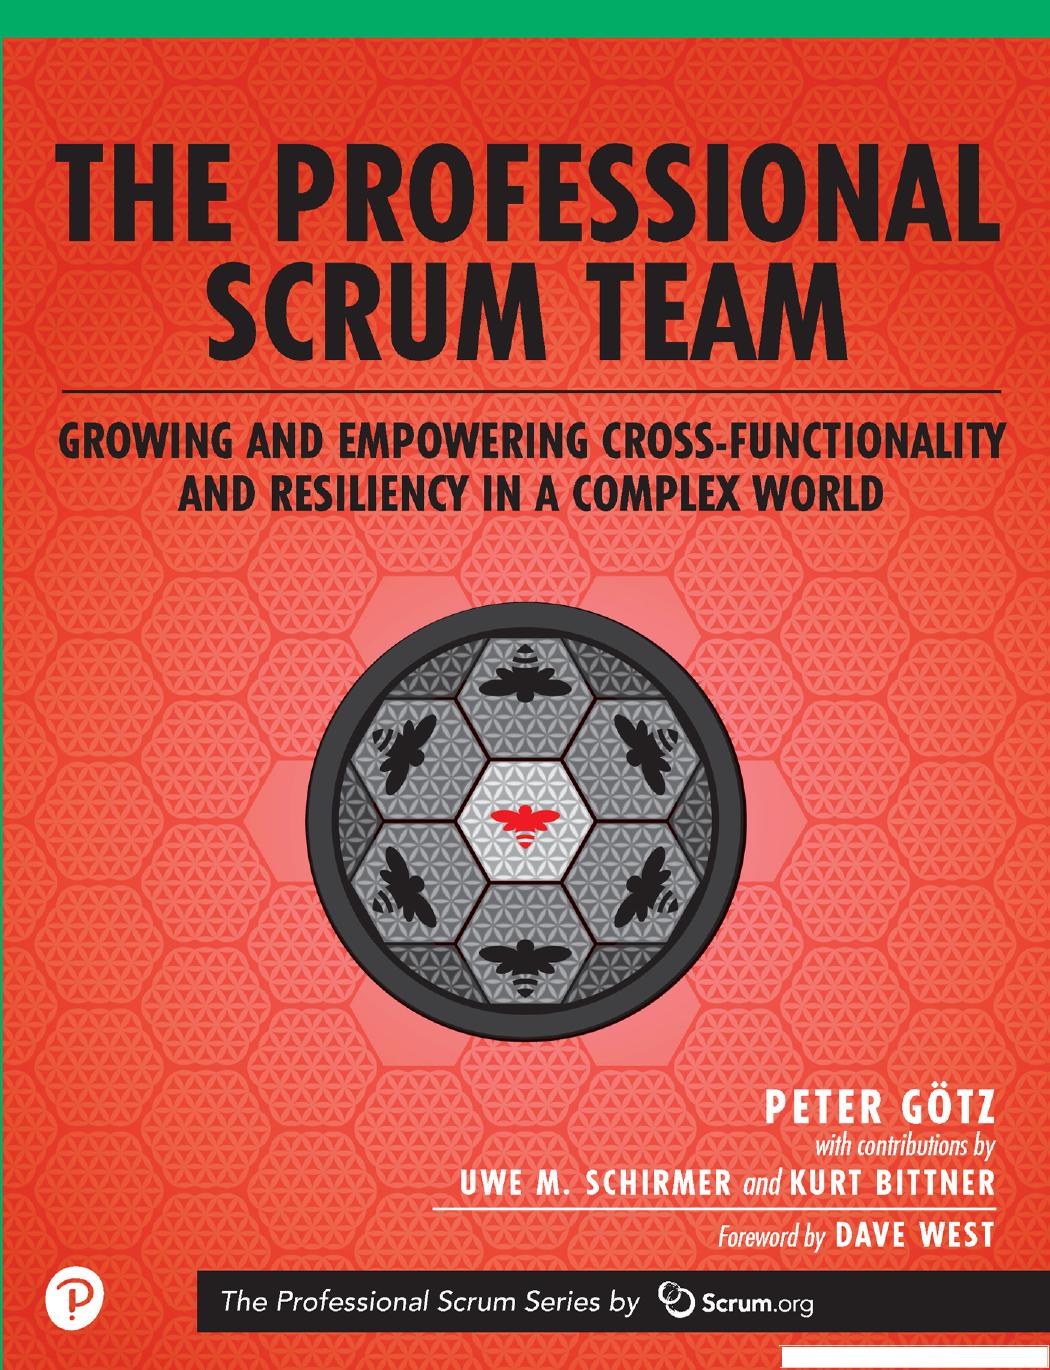 The Professional Scrum Team: Growing and Empowering Cross-Functionality and Resiliency in a Complex World